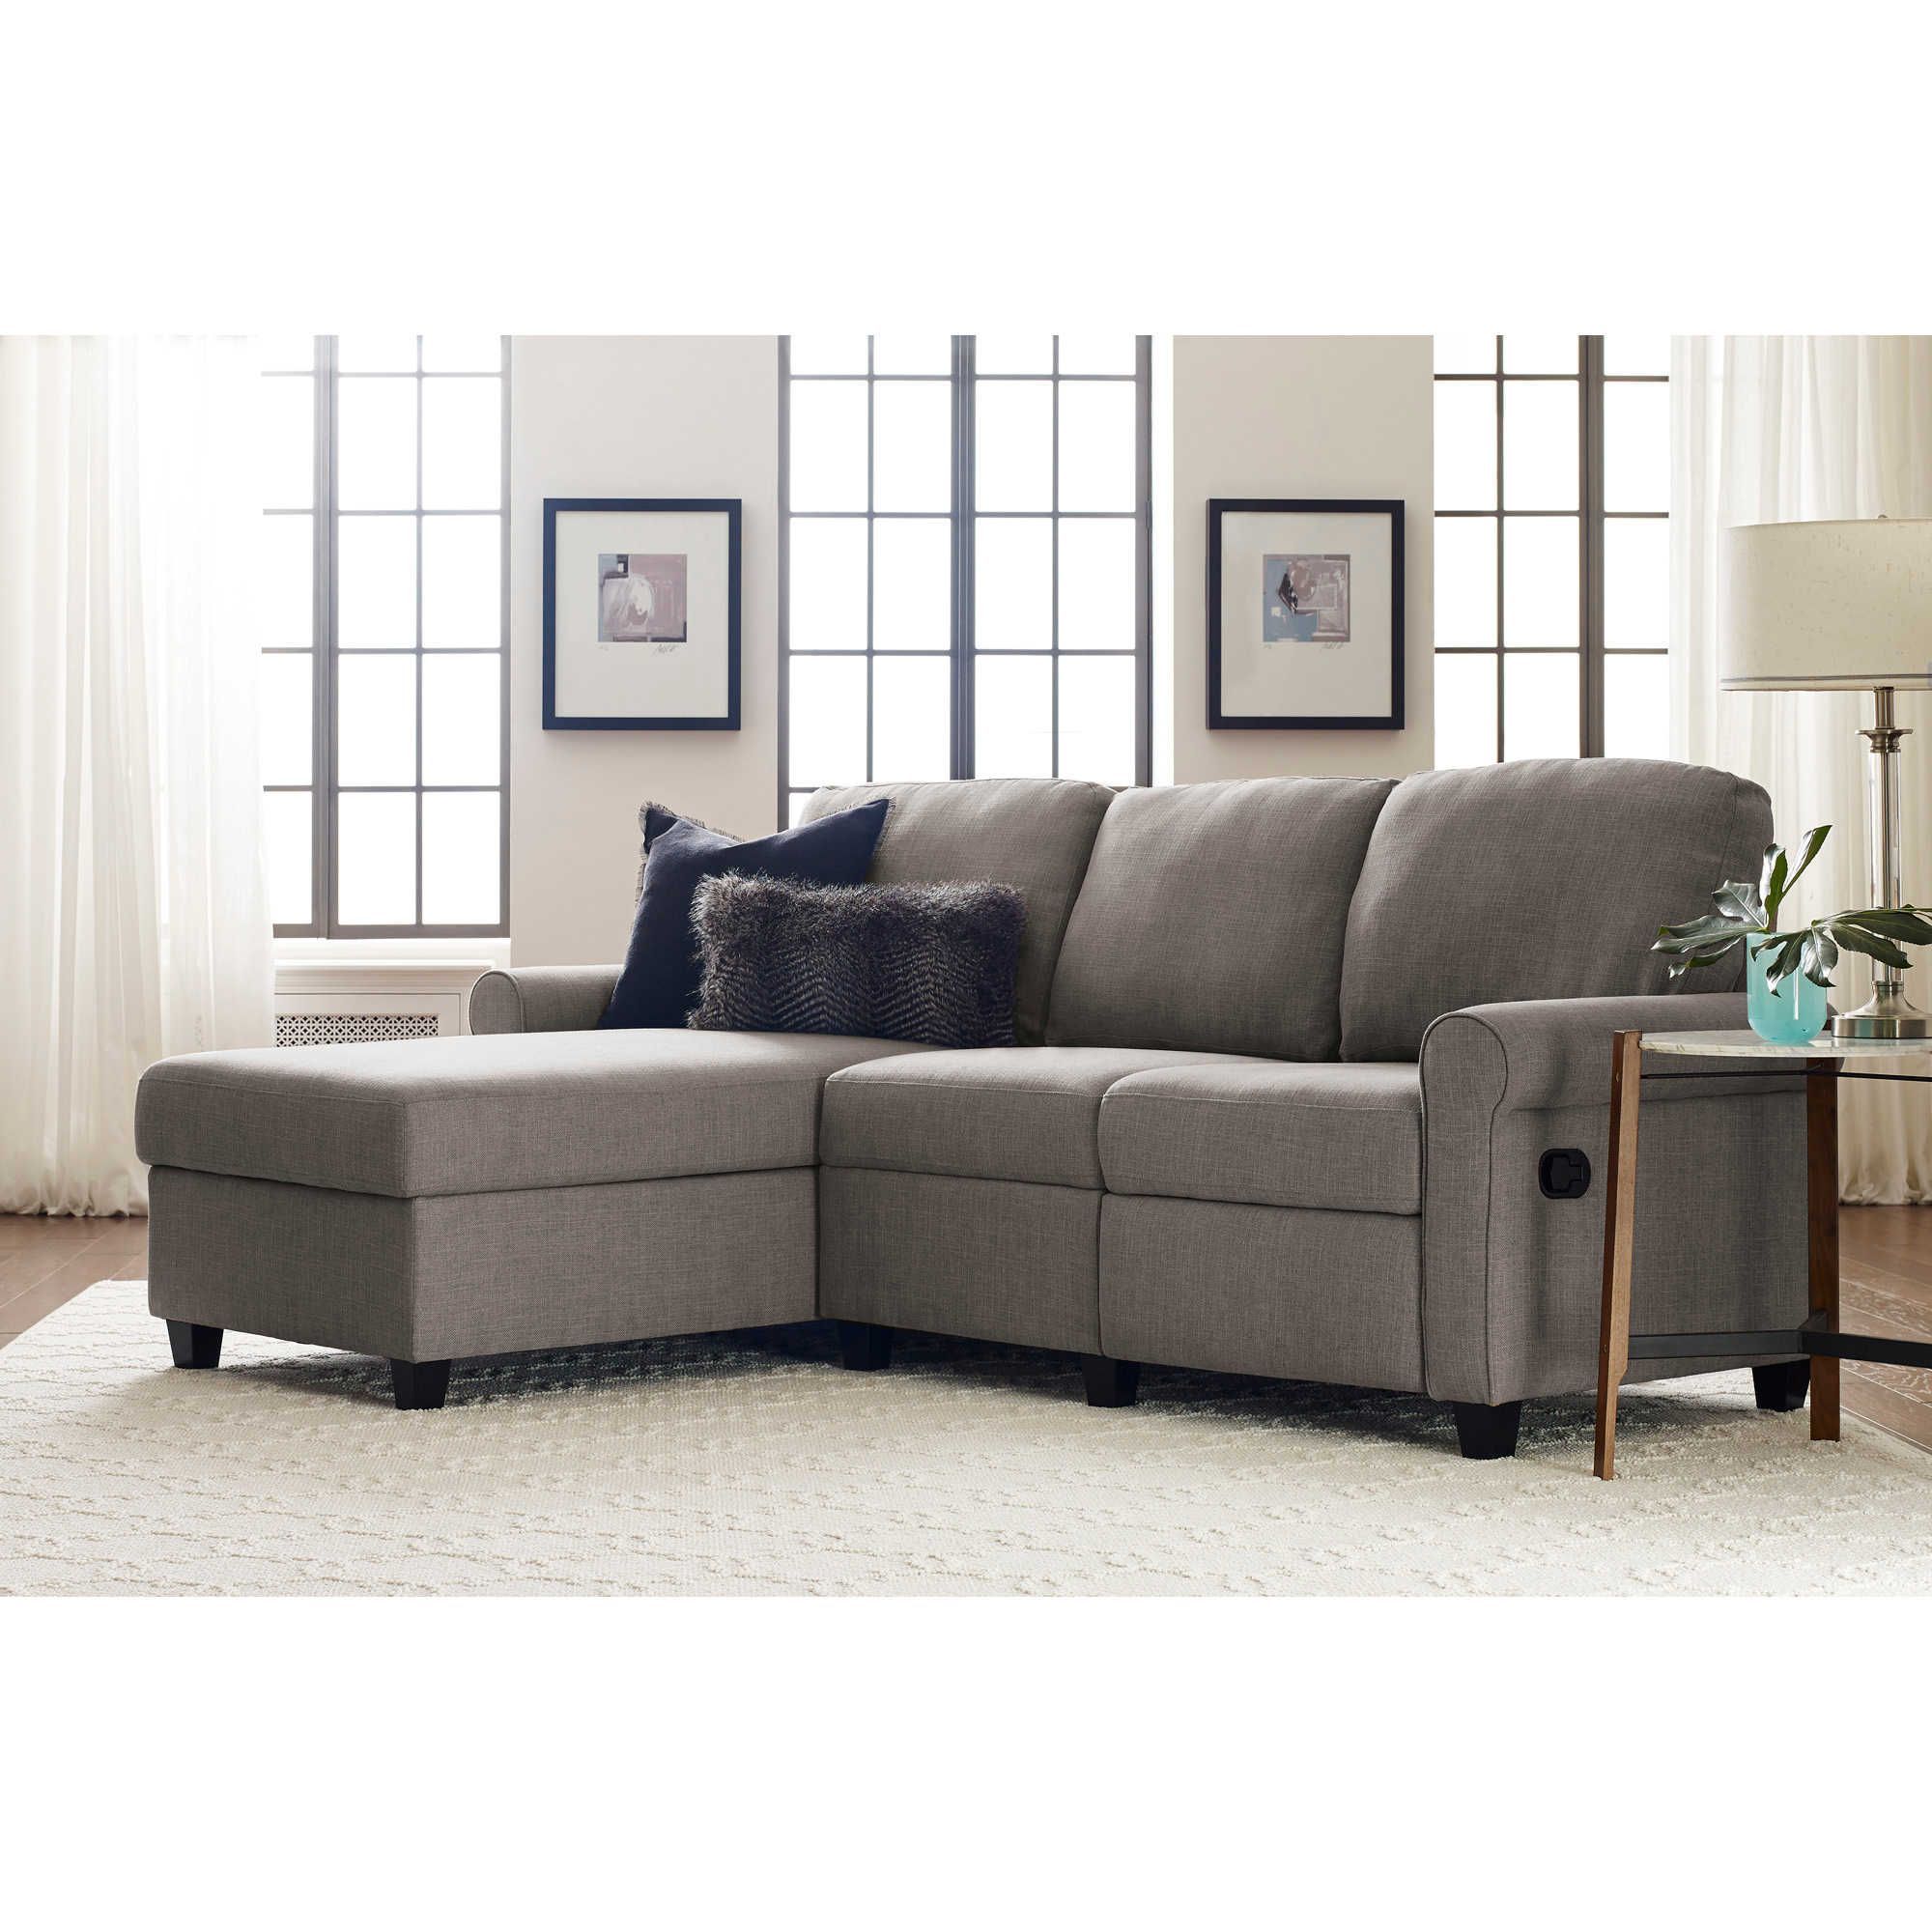 Serta® Copenhagen Reclining Sectional Sofa With Storage Within Copenhagen Reclining Sectional Sofas With Right Storage Chaise (View 1 of 15)